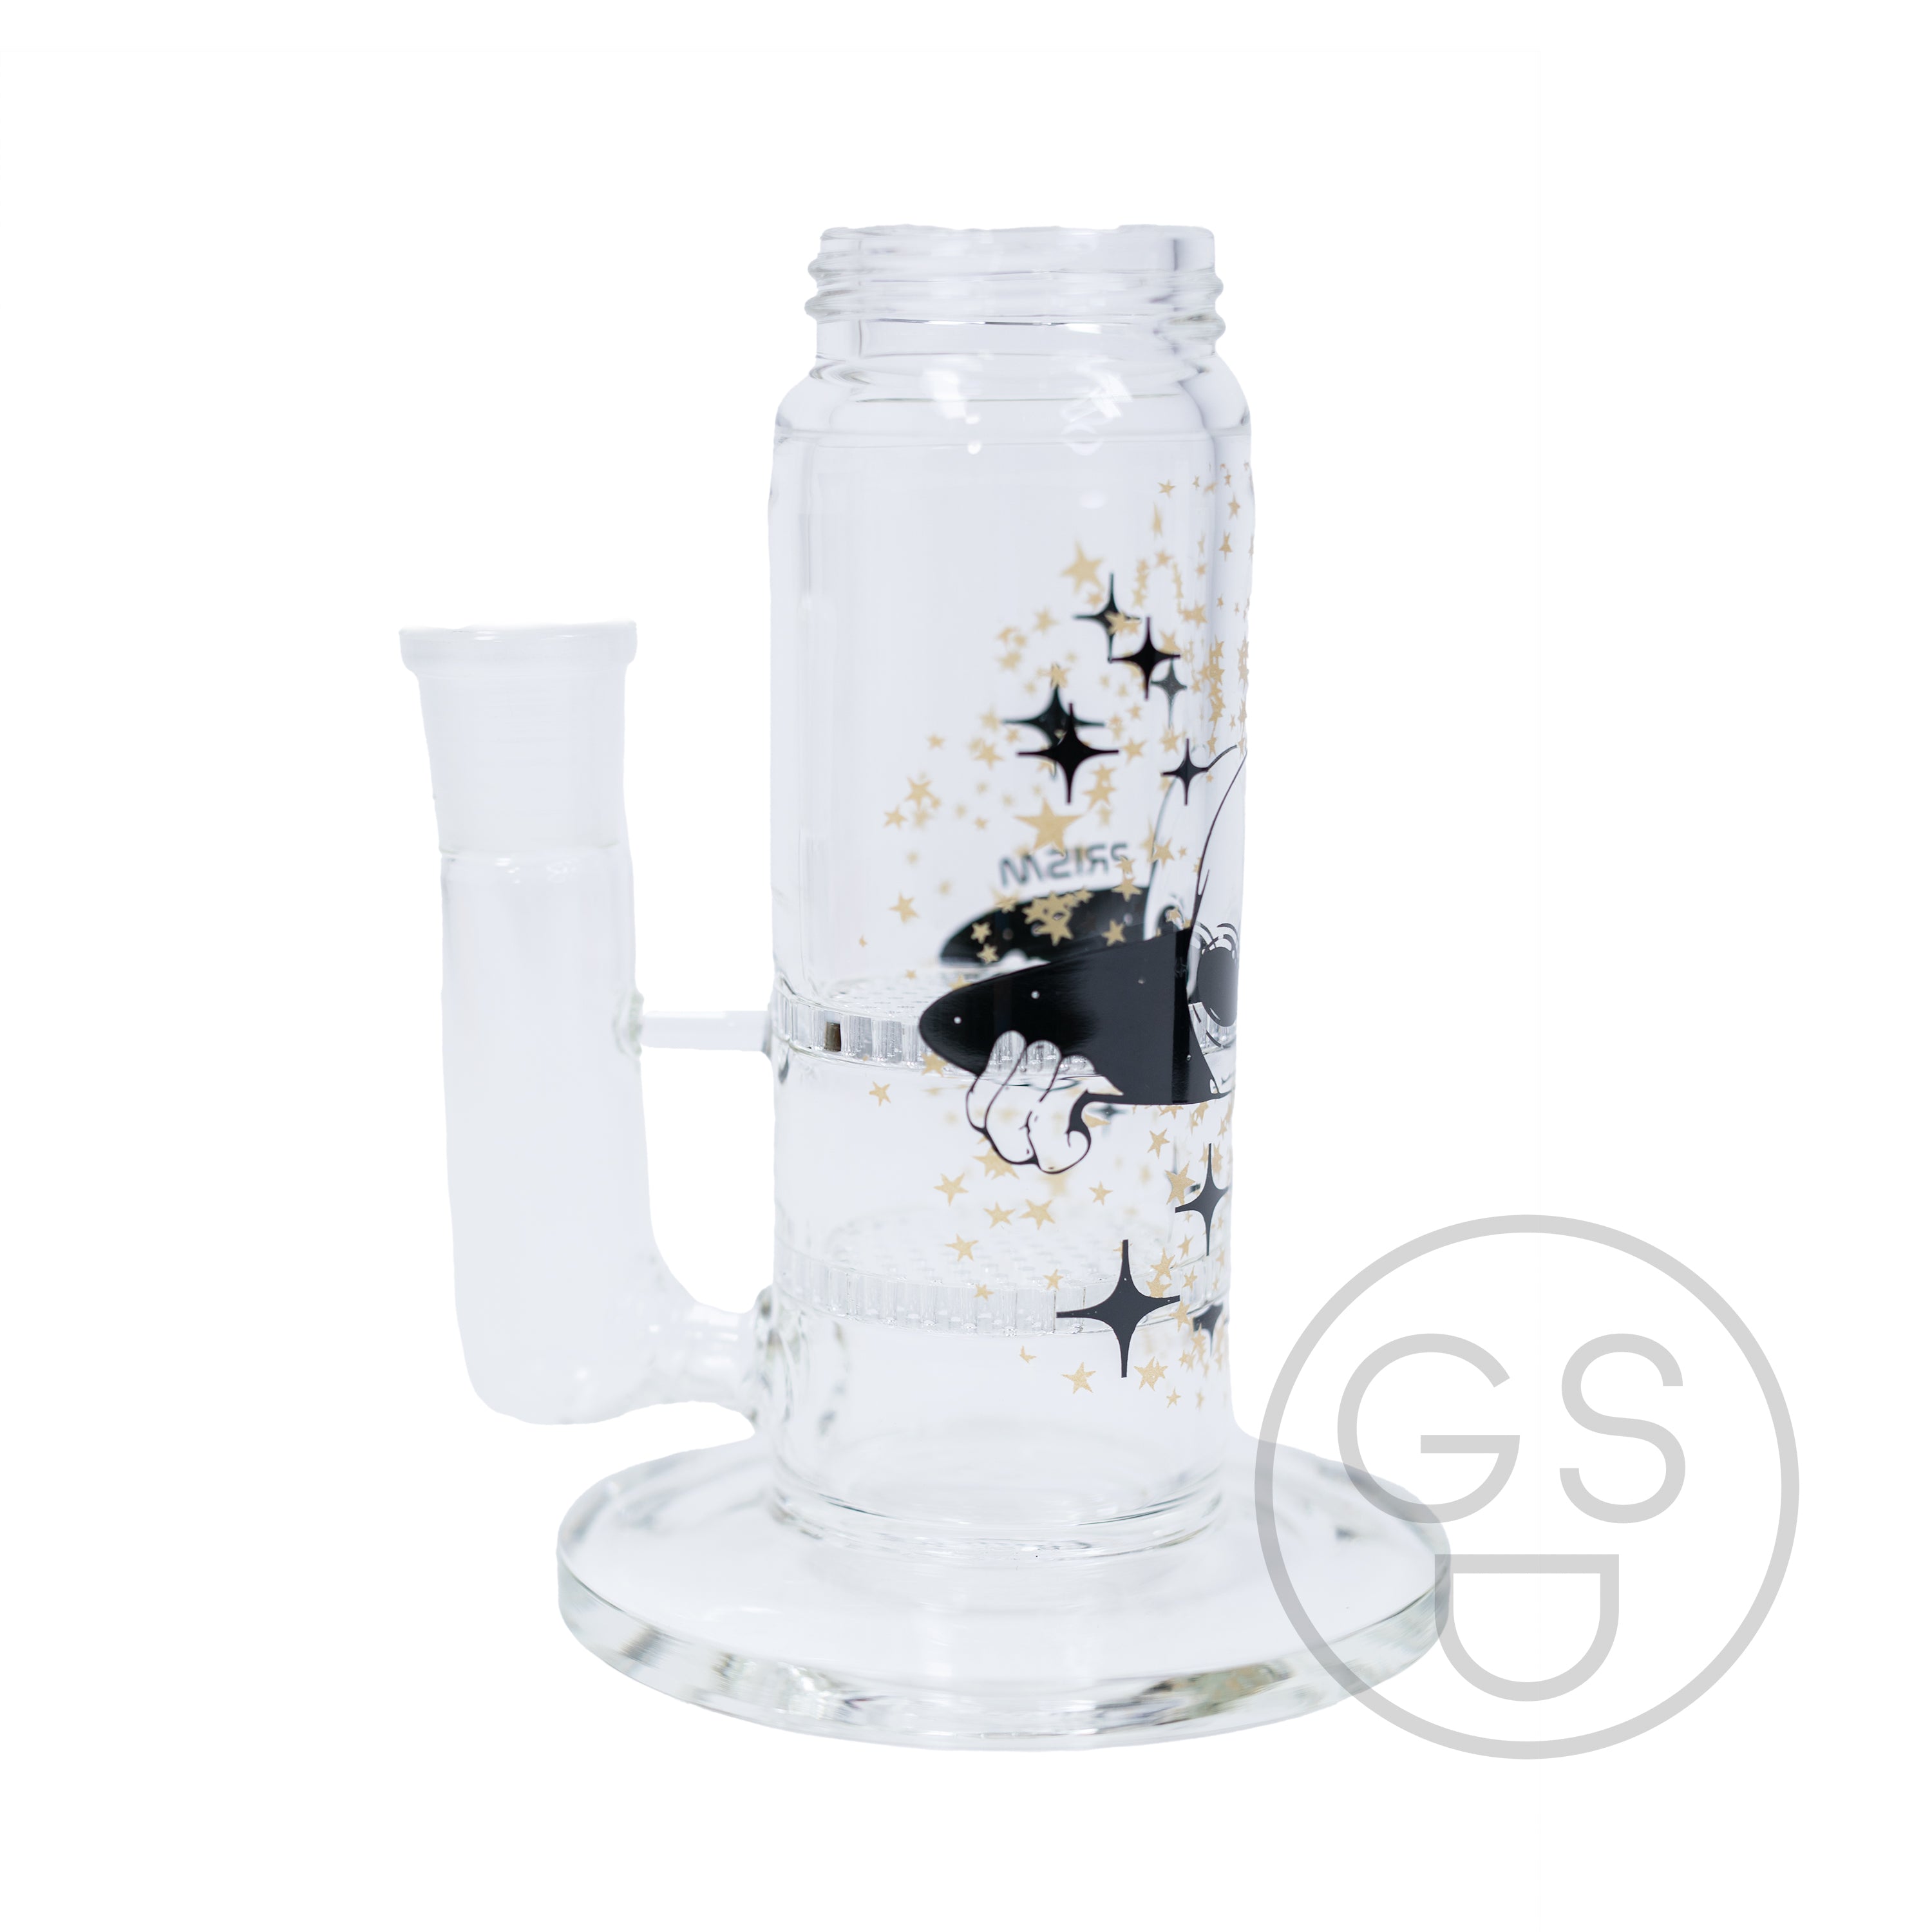 Prism Modular Waterpipe Honeycomb Base - Spaced Out